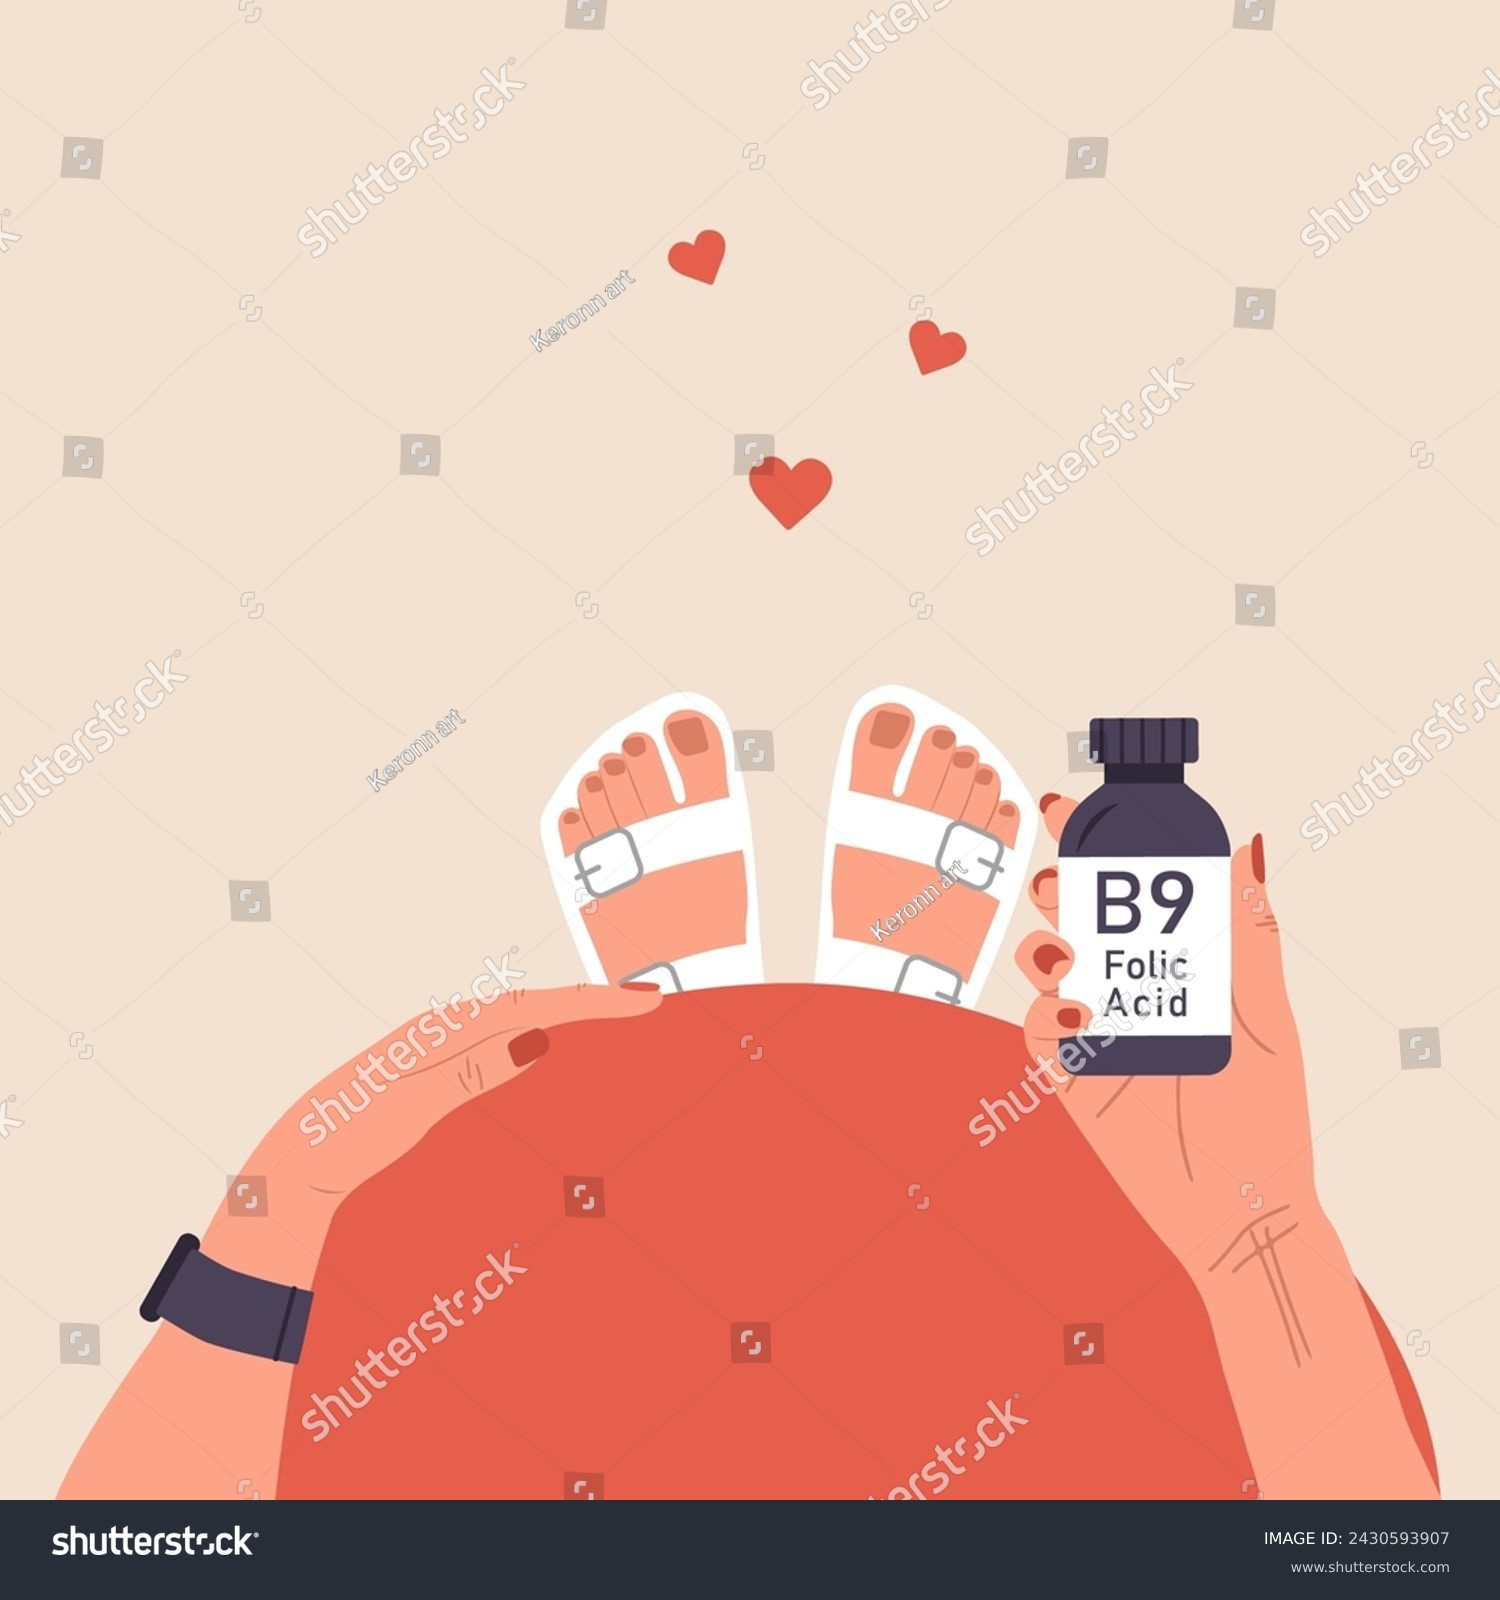 Folic acid. Female hand holding vitamin B9. Top view of pregnancy belly. Risk reducing. Woman taking vitamins for baby health. Supplements for pregnant. Vector illustration in flat cartoon style. #2430593907